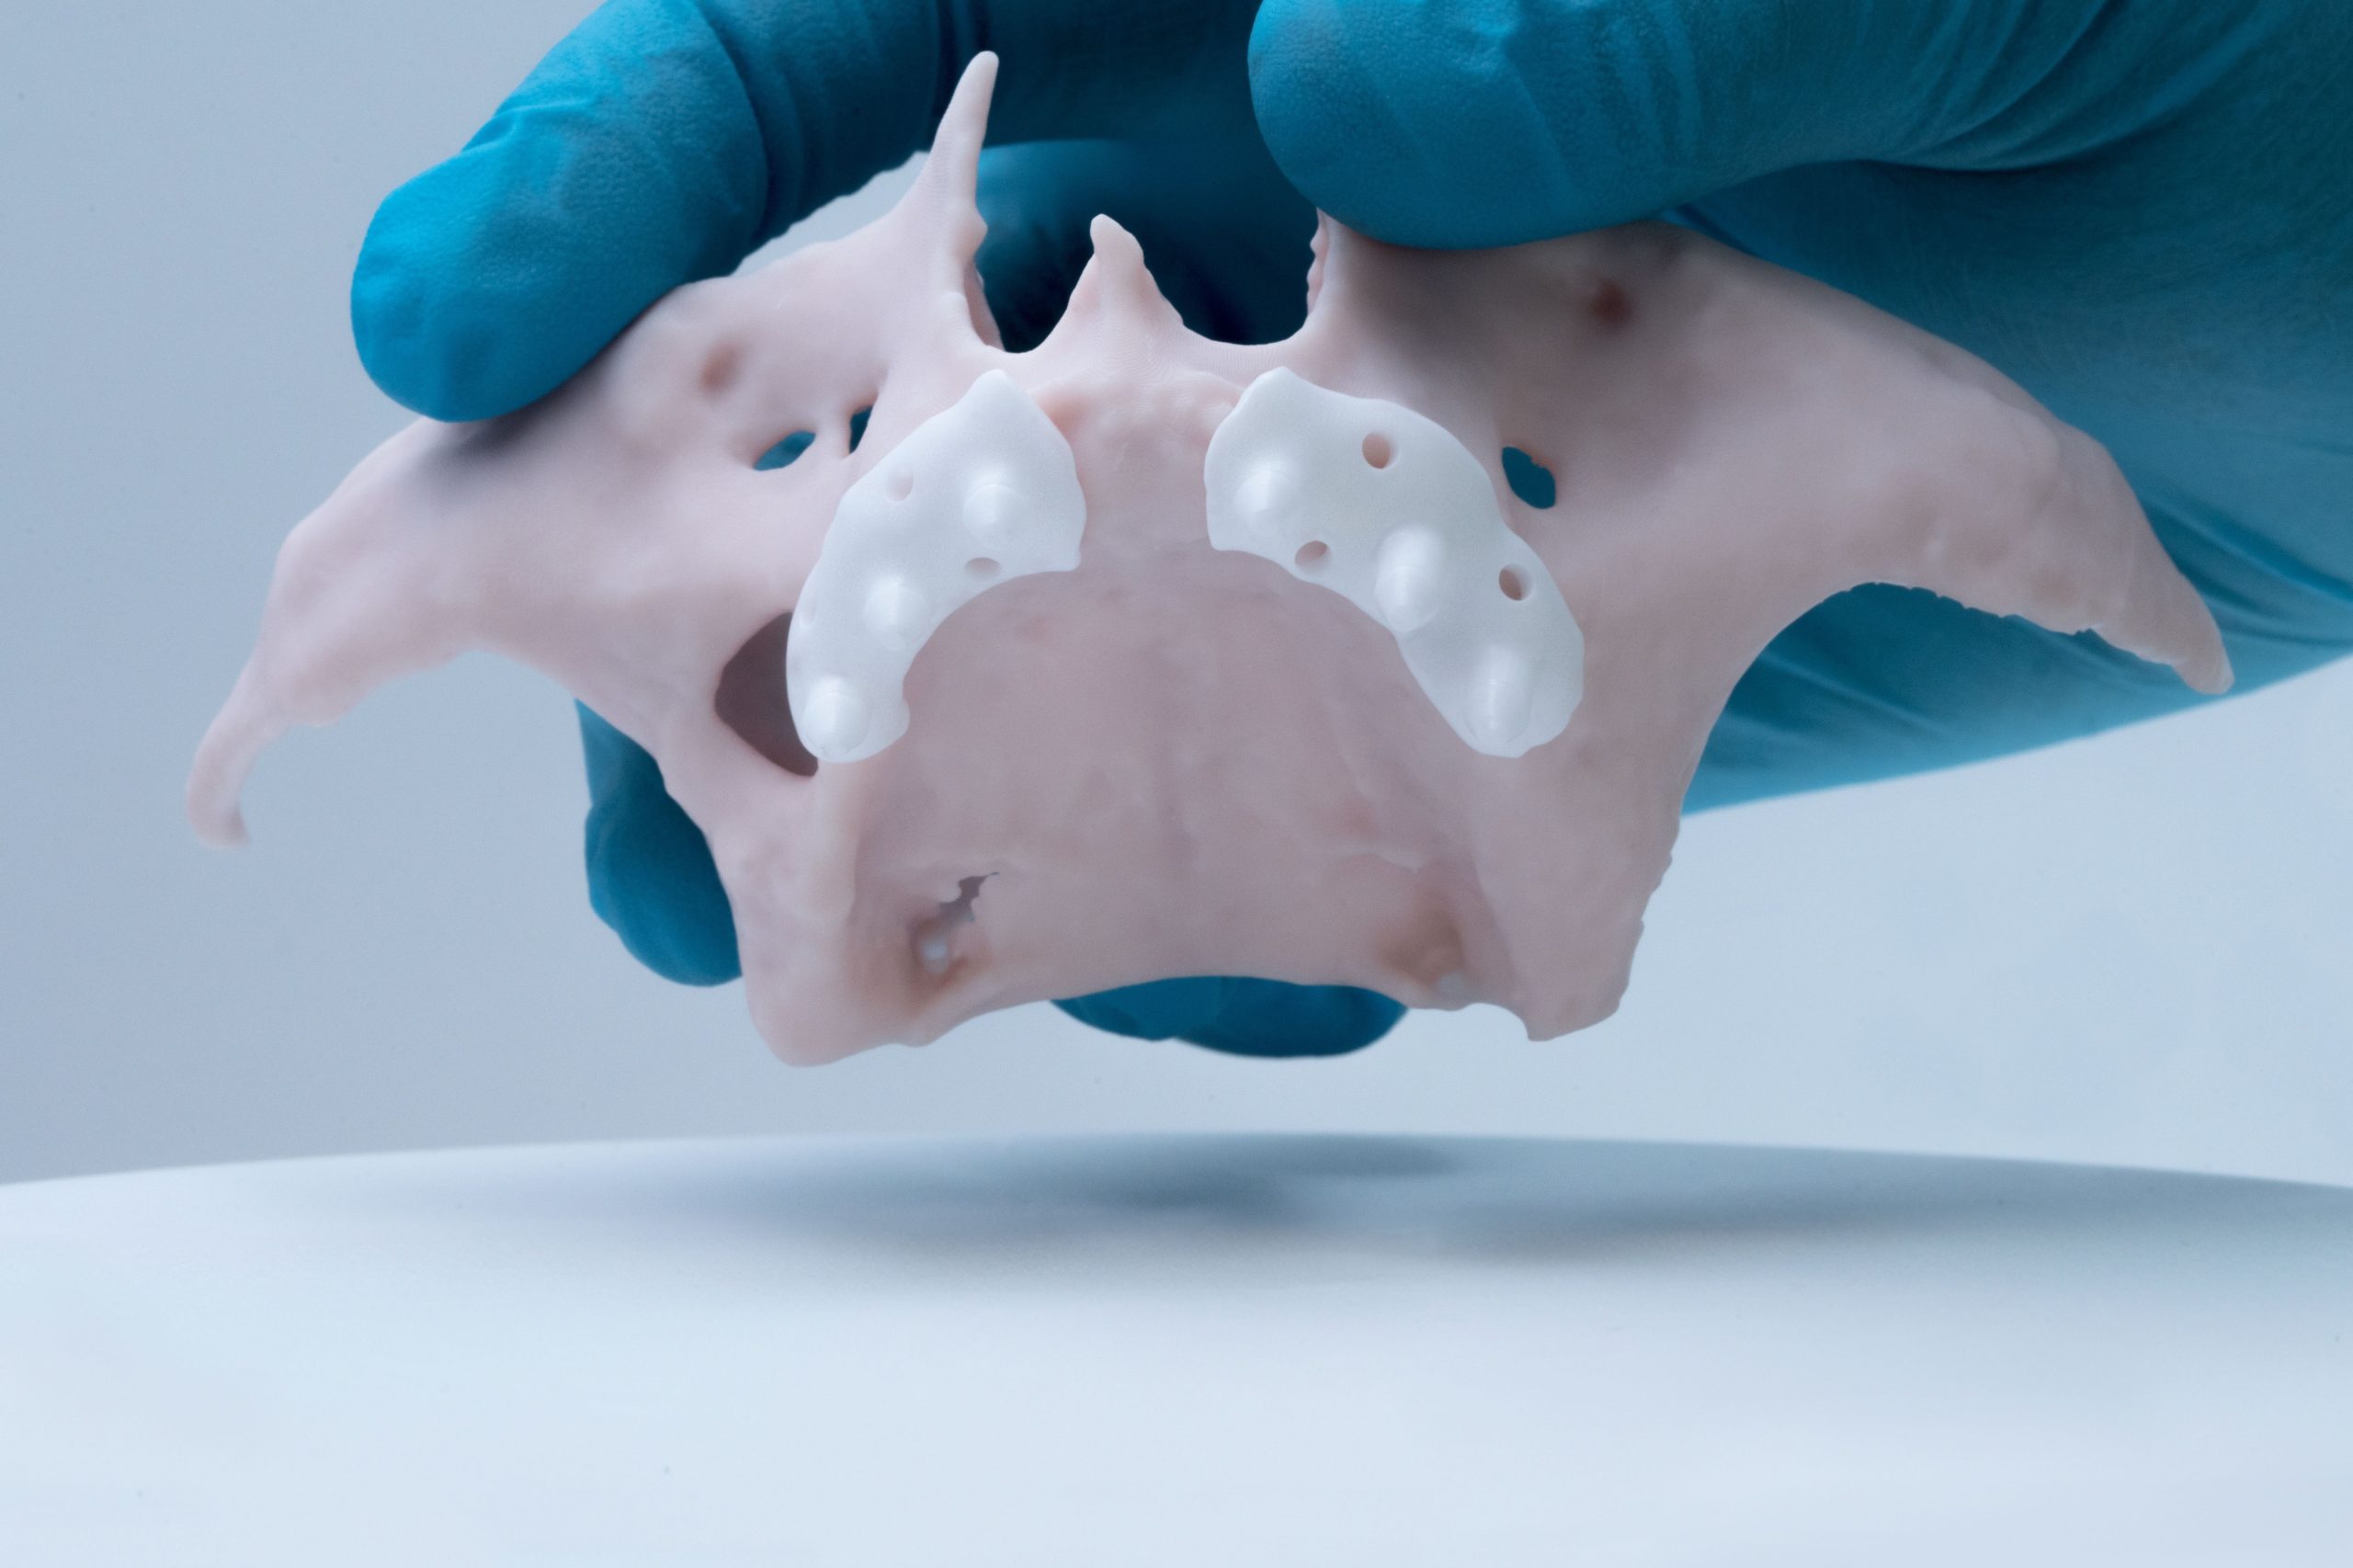 Ceramic subperiosteal jaw implant placed in patient for the first time ever